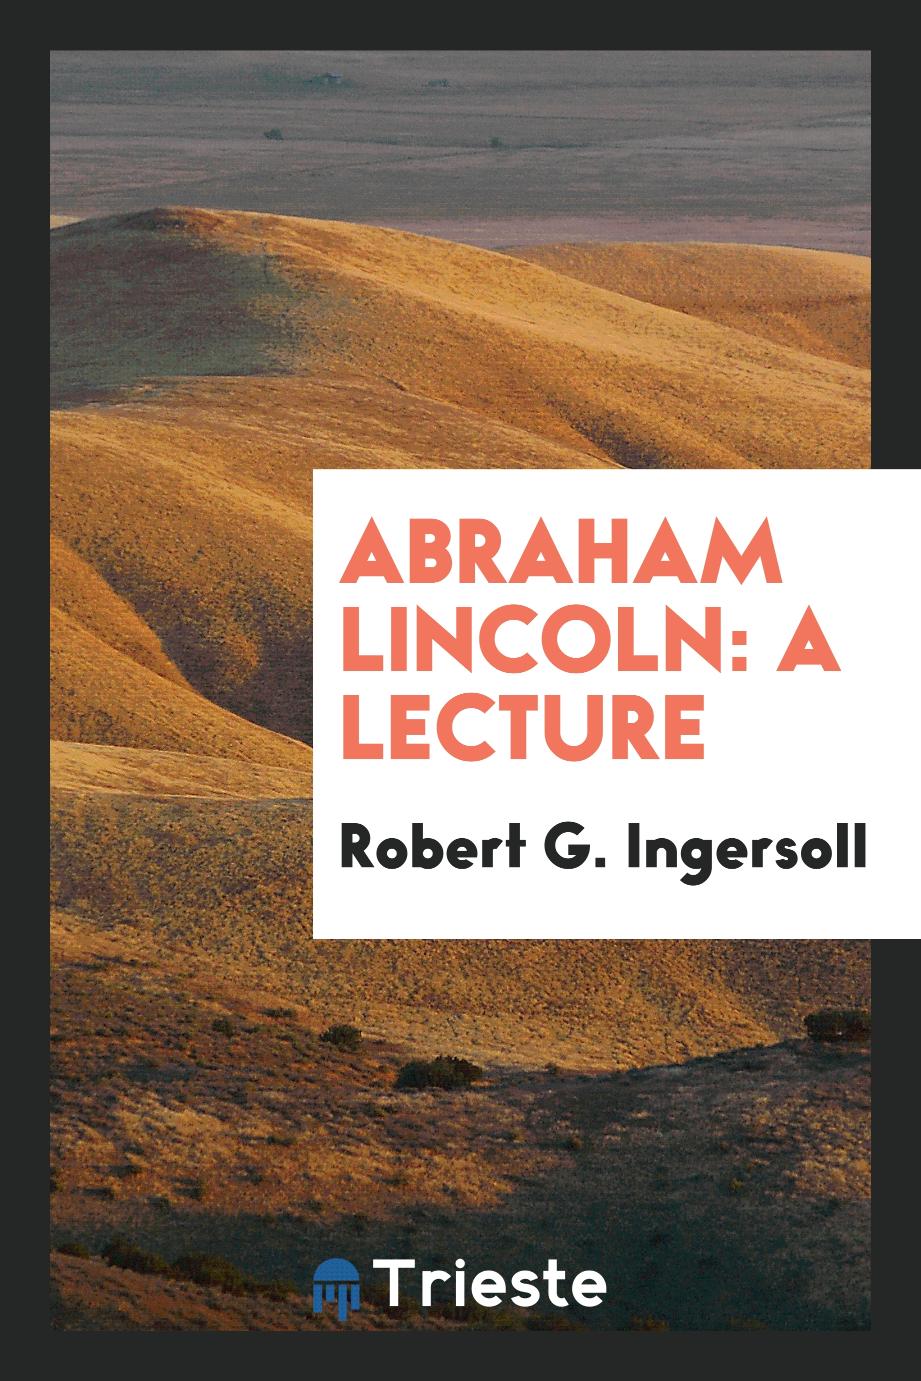 Abraham Lincoln: A Lecture